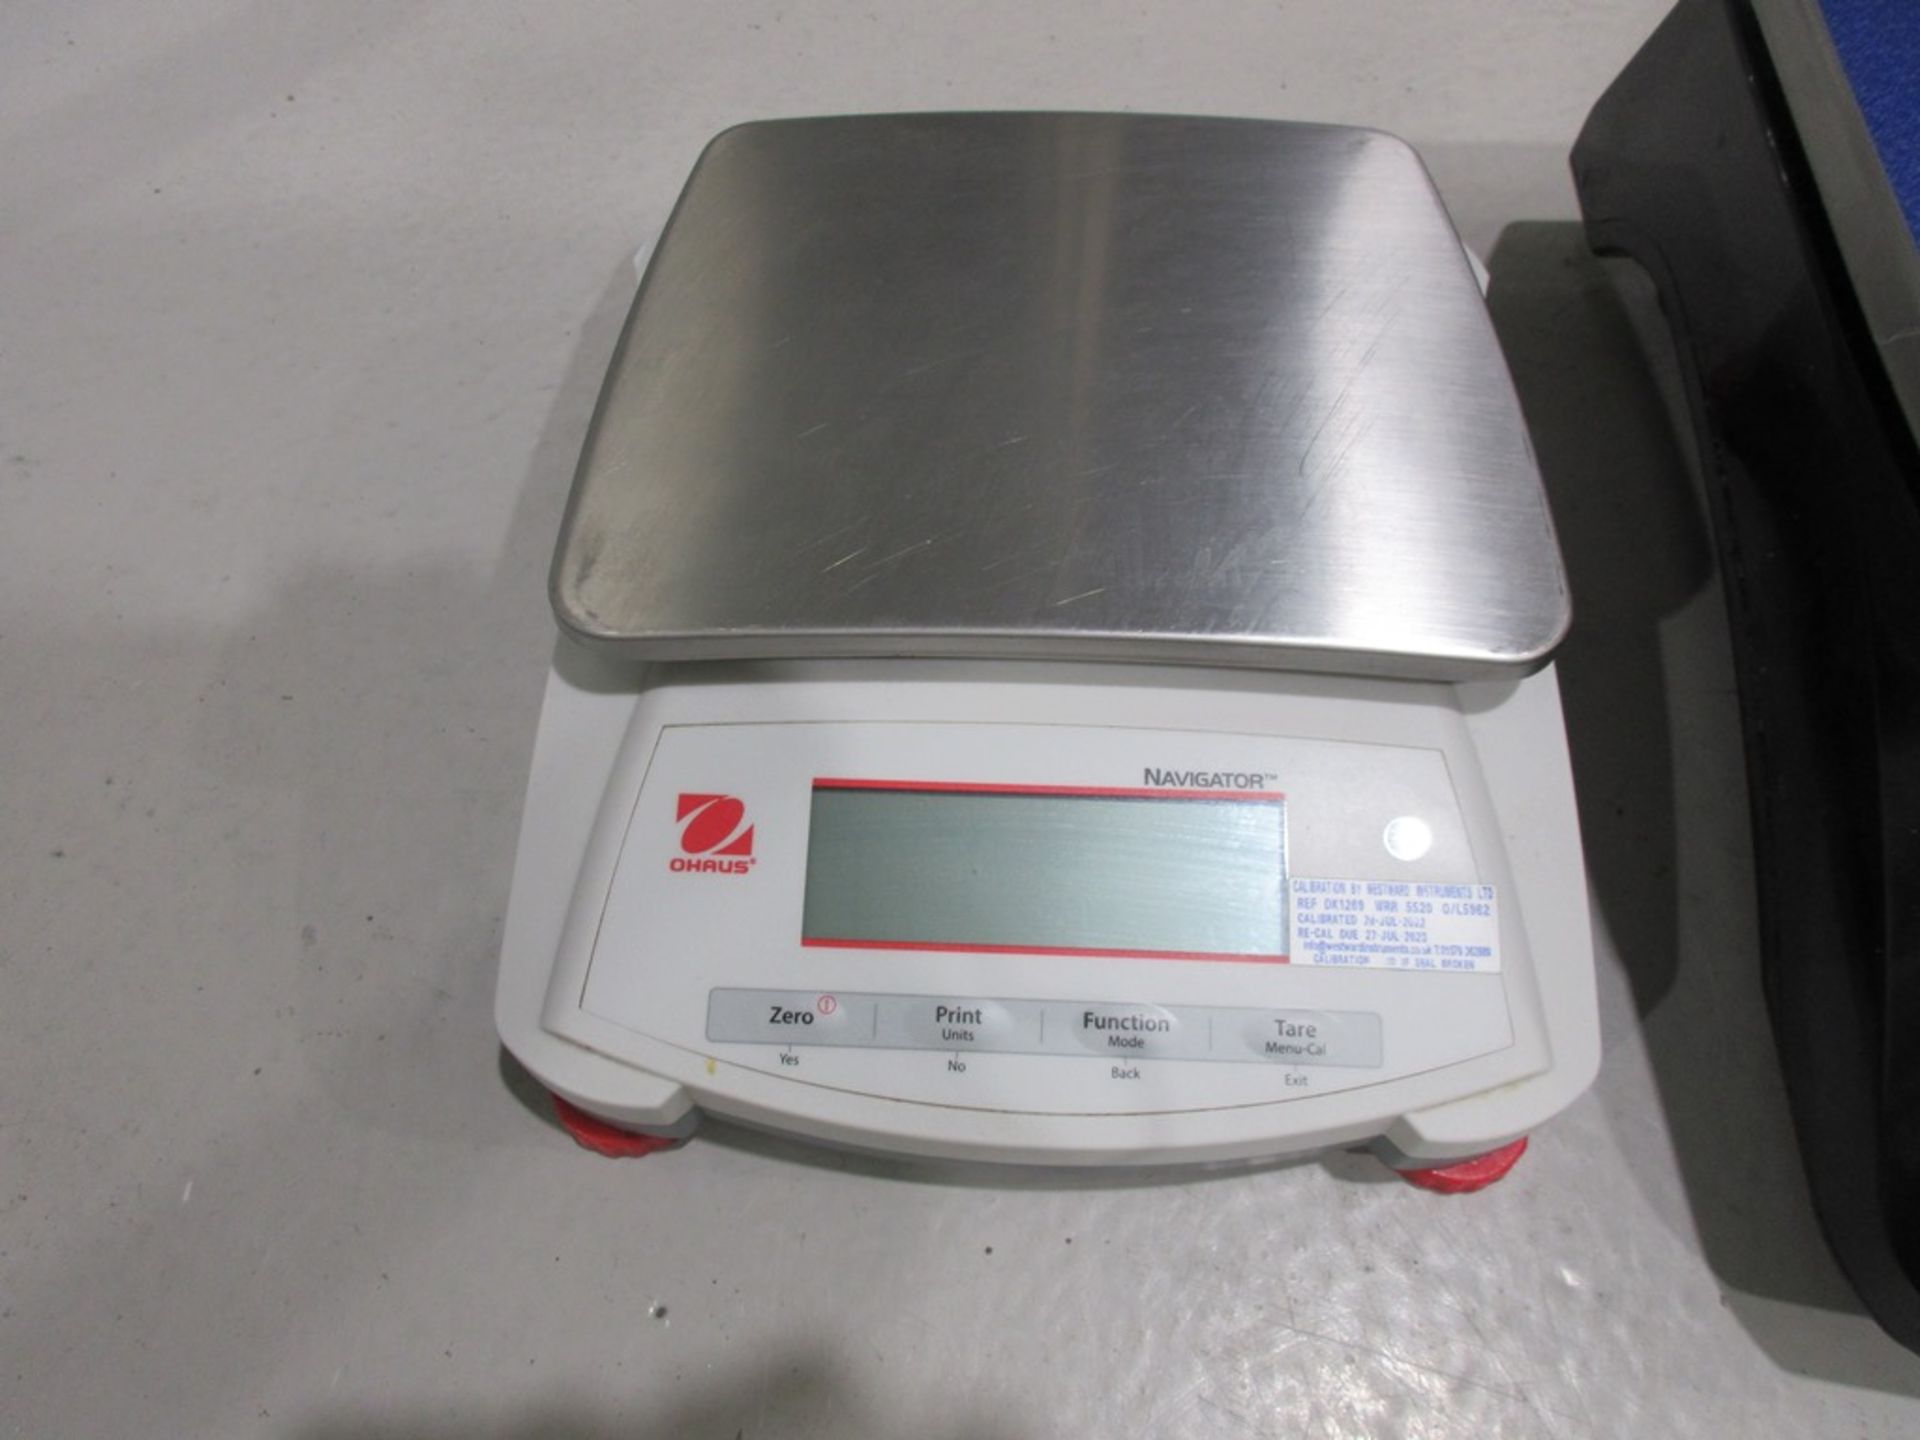 GRAM S2-15000 electronic bench top weighing scales, serial no. 0000366499 and OHAUS NV221 electronic - Image 3 of 3